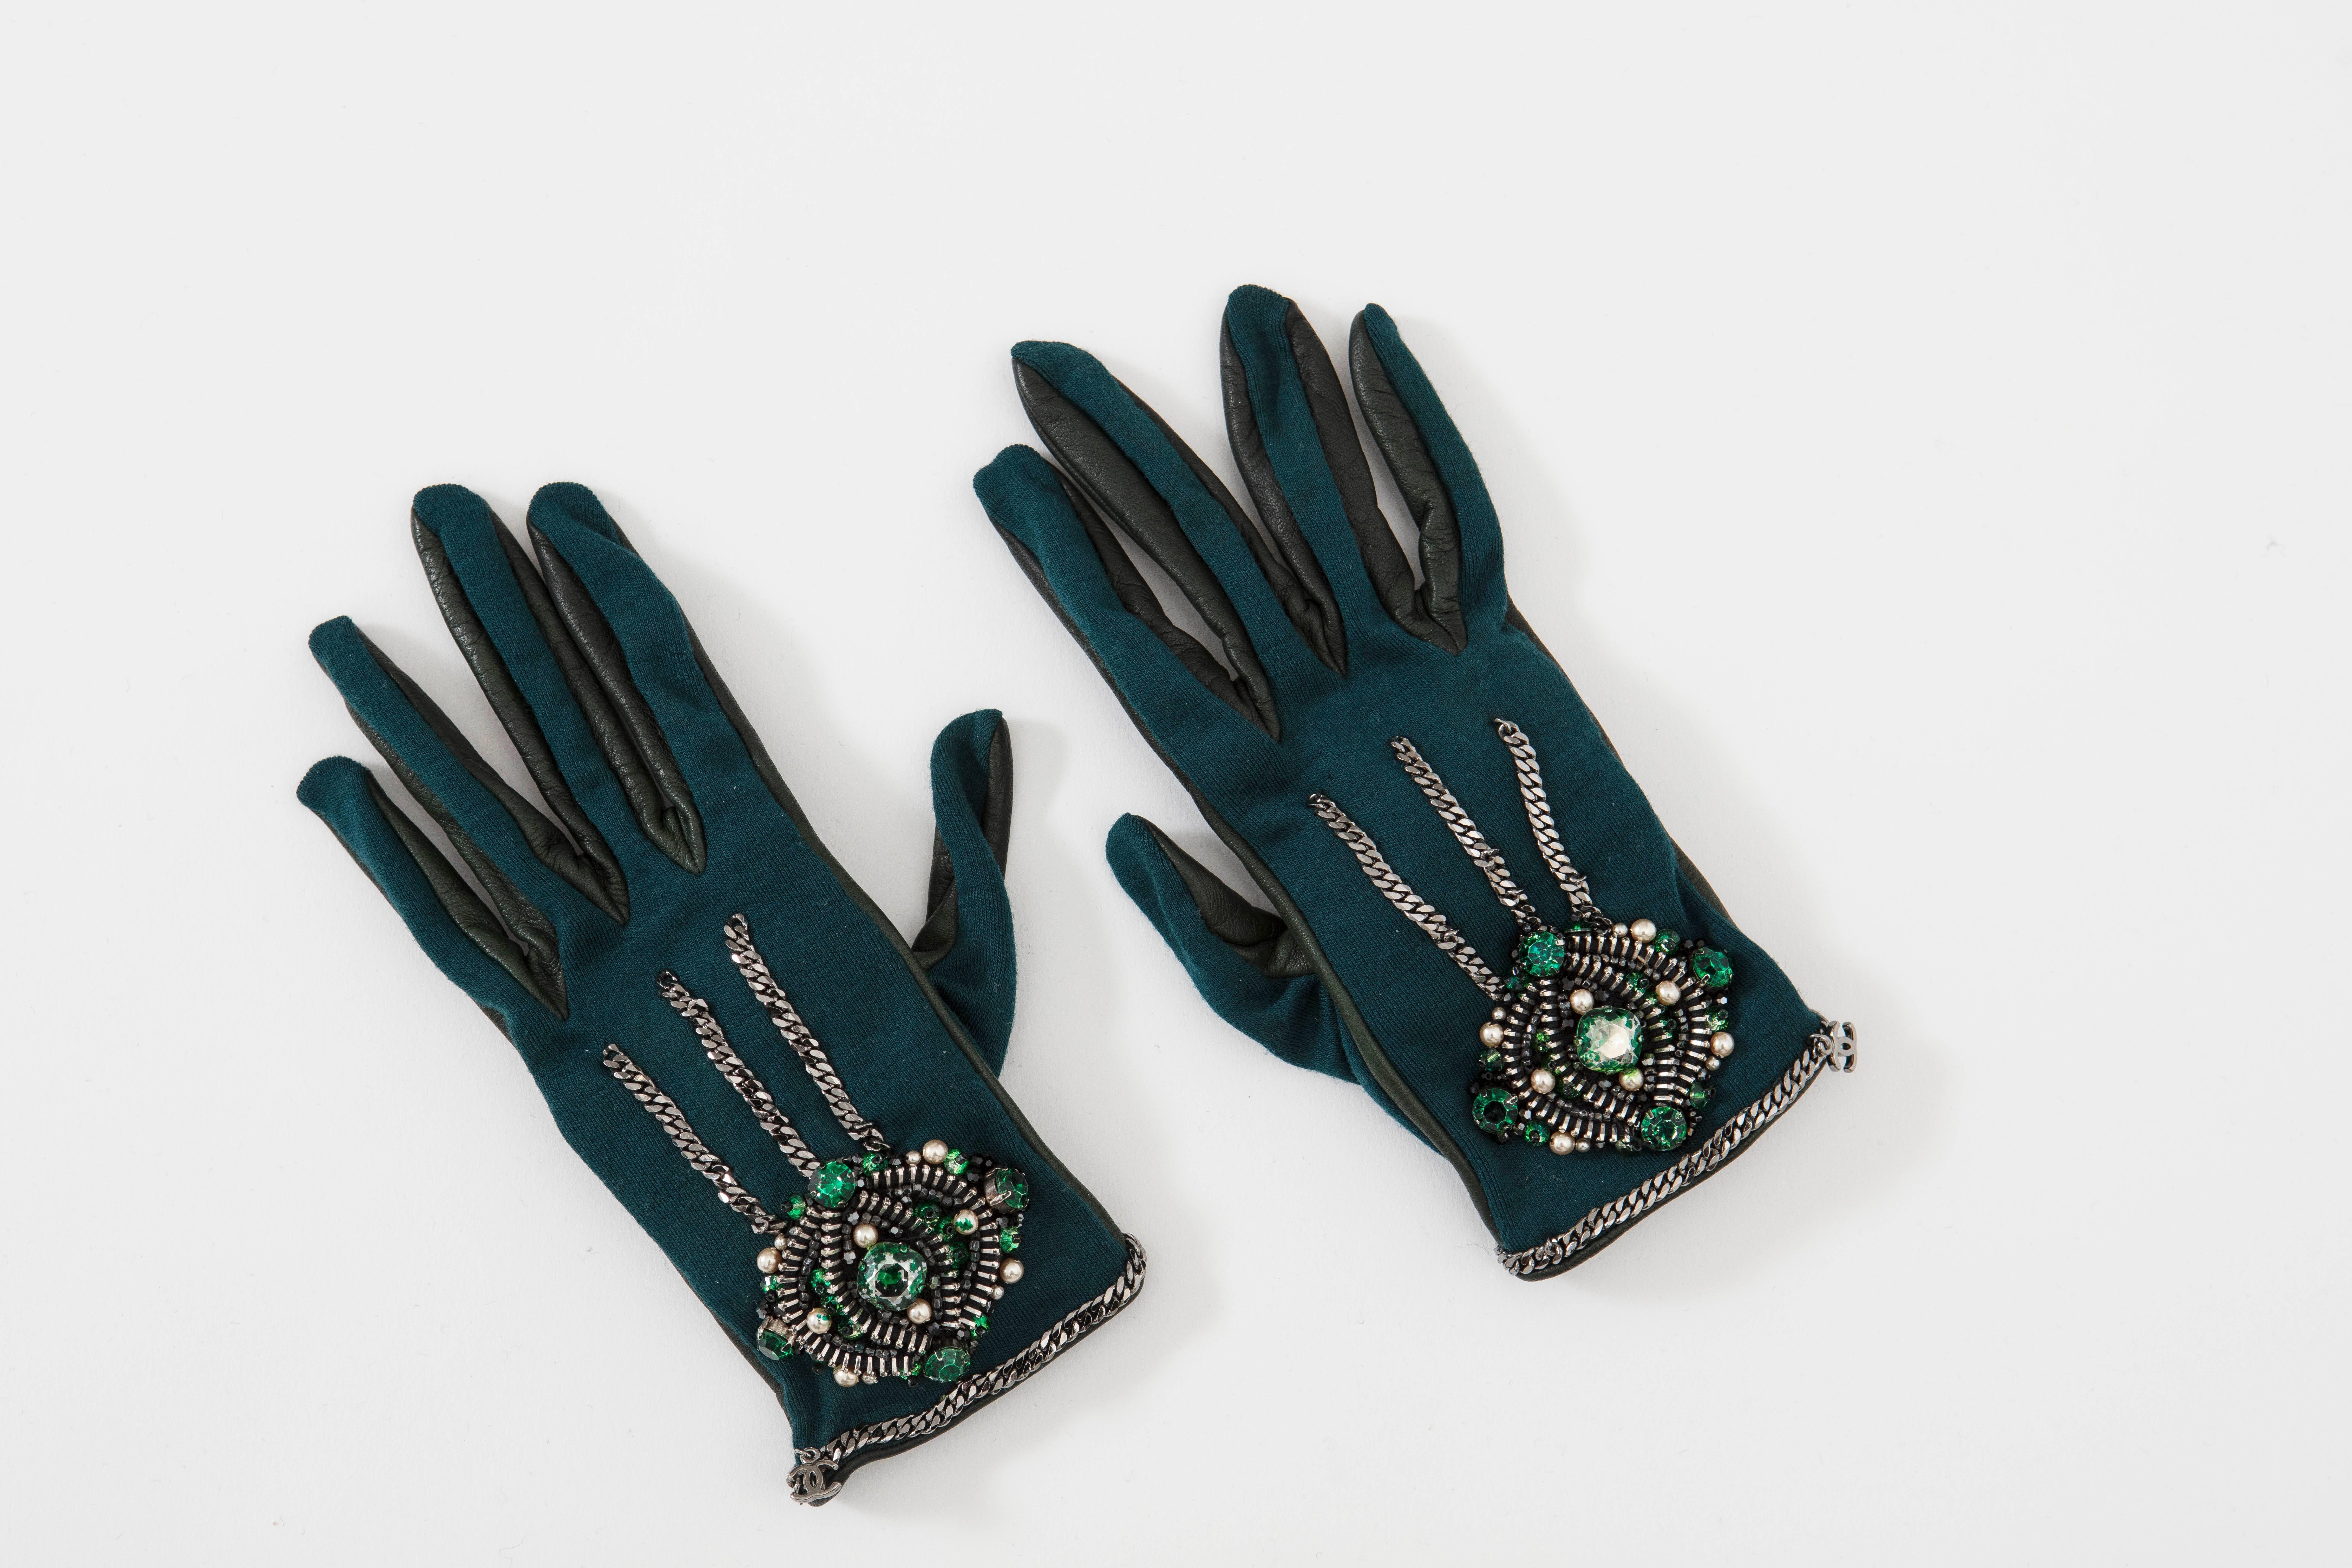  lChanel, Paris-Londres collection Pre-Fall 2007 emerald green embellished jersey gloves with evergreen leather trim, gunmetal-tone chain-link trim featuring faux pearls and crystal embellishments and snap closure at wrist.

 Designer size